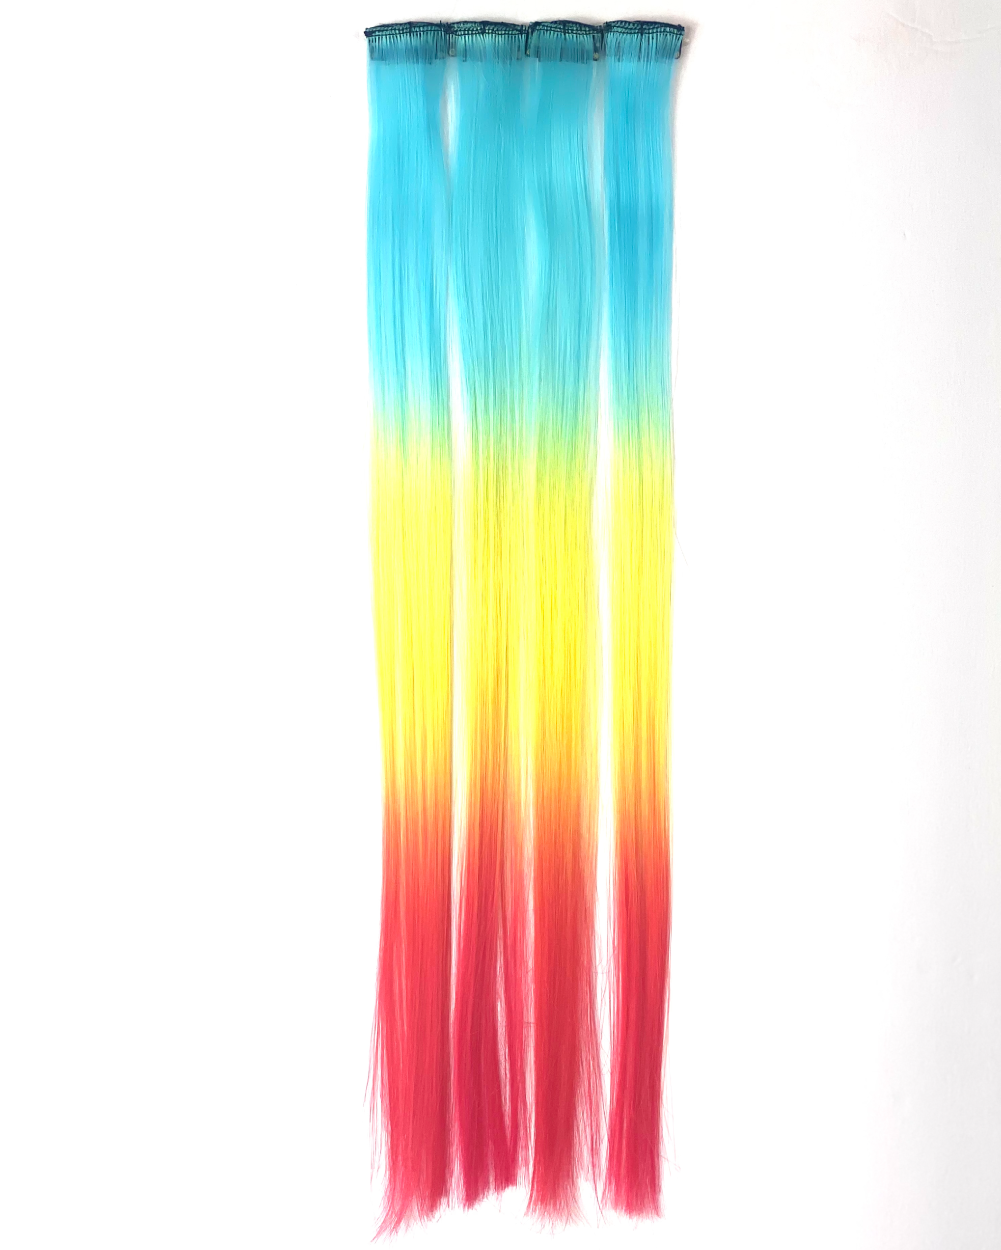 Rainbow - Ombré Clip-In Hair Extensions - Lunautics Clip-In Extensions